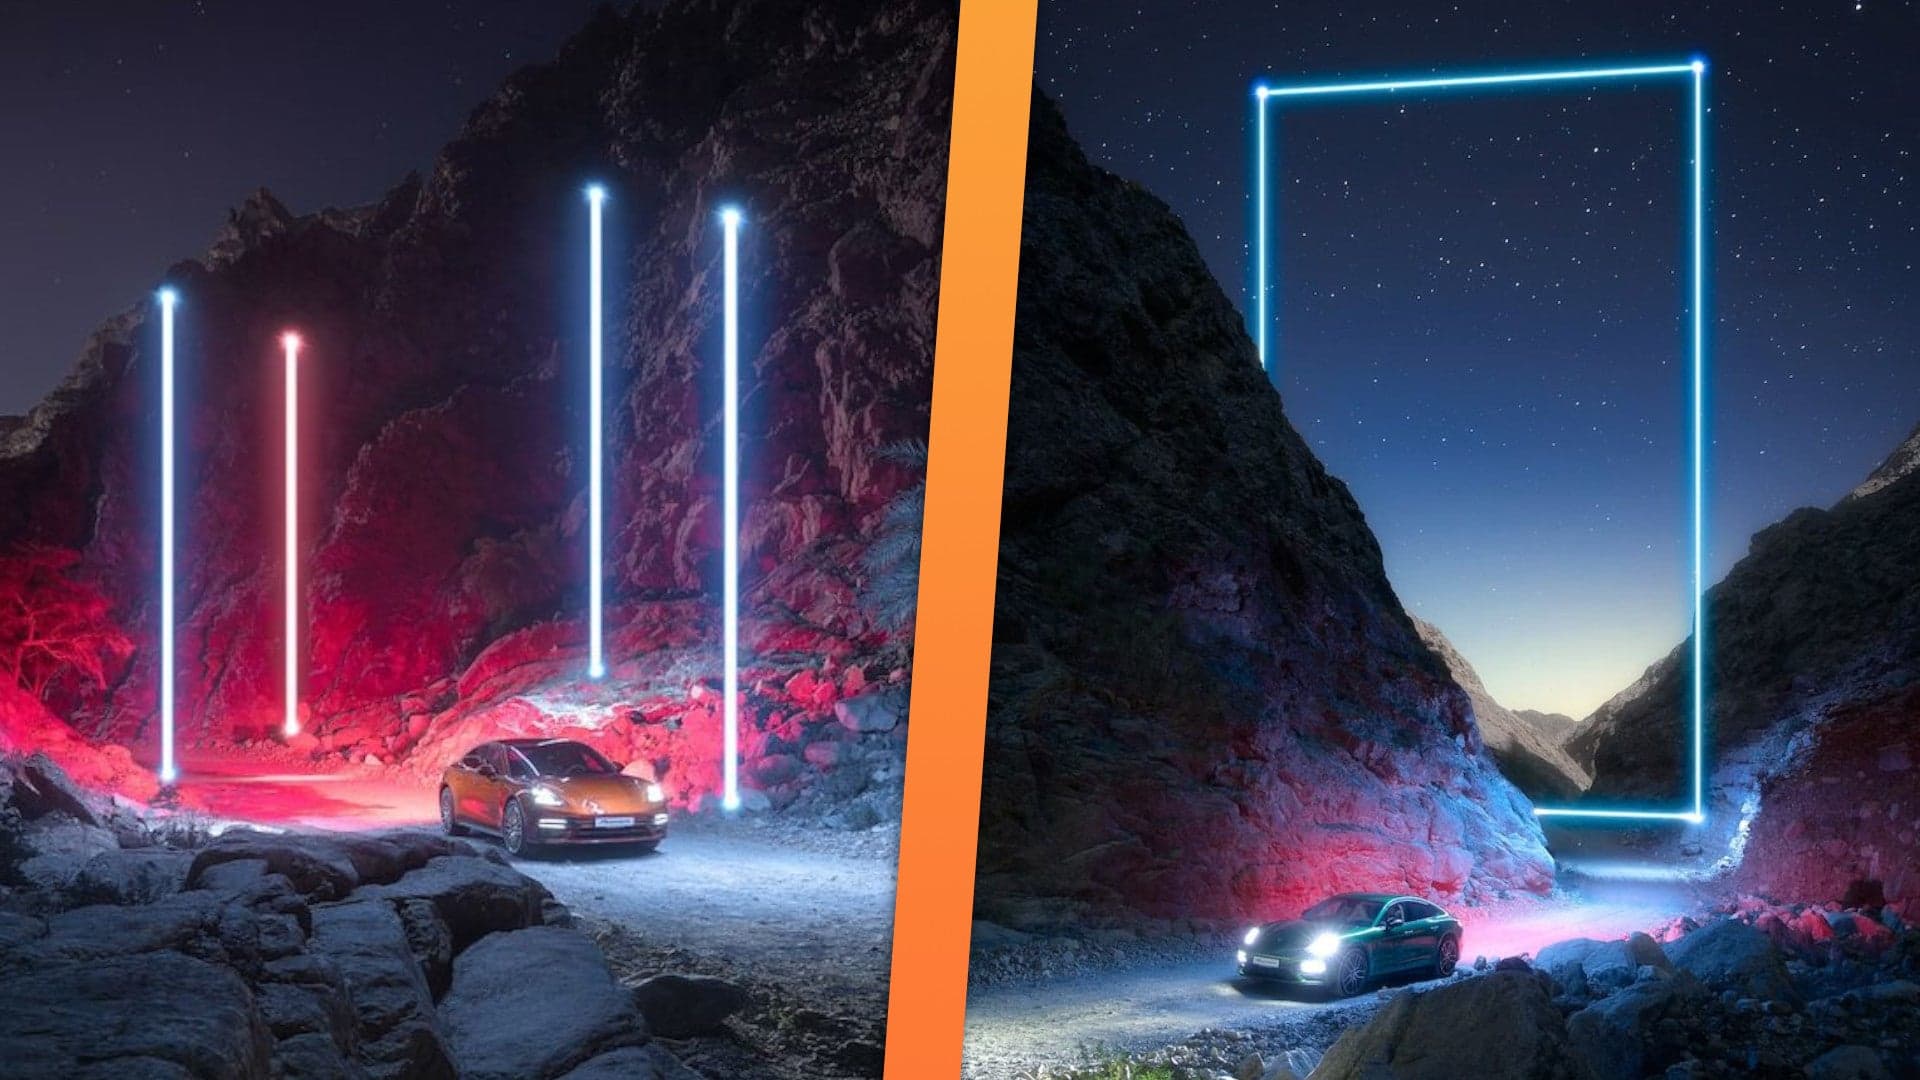 Porsche’s Surreal Nighttime Photoshoot Was Lit With Drones in the Desert